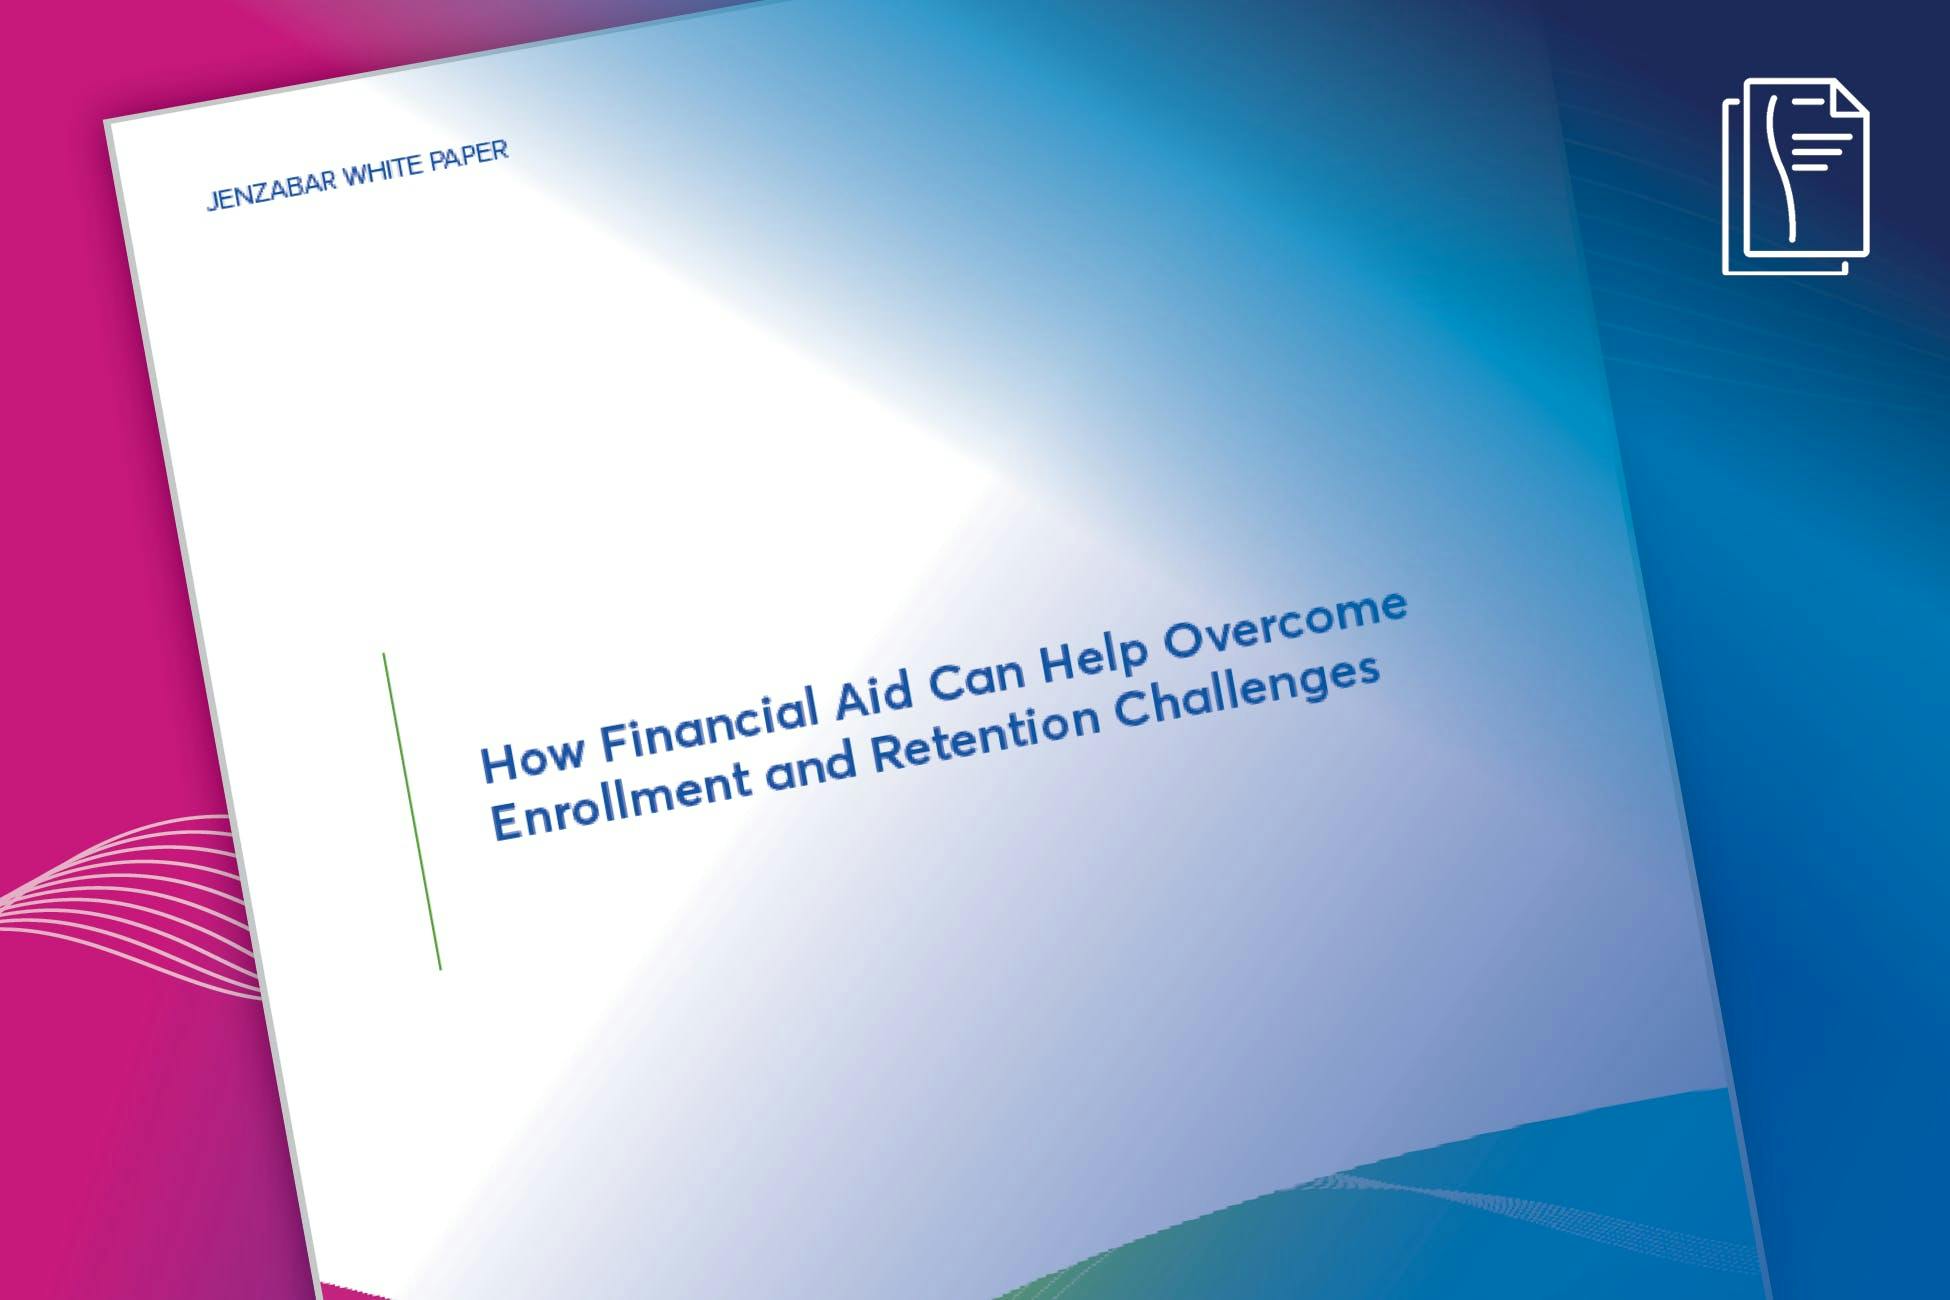 White Paper: How Financial Aid Can Help Enrollment and Retention Challenges